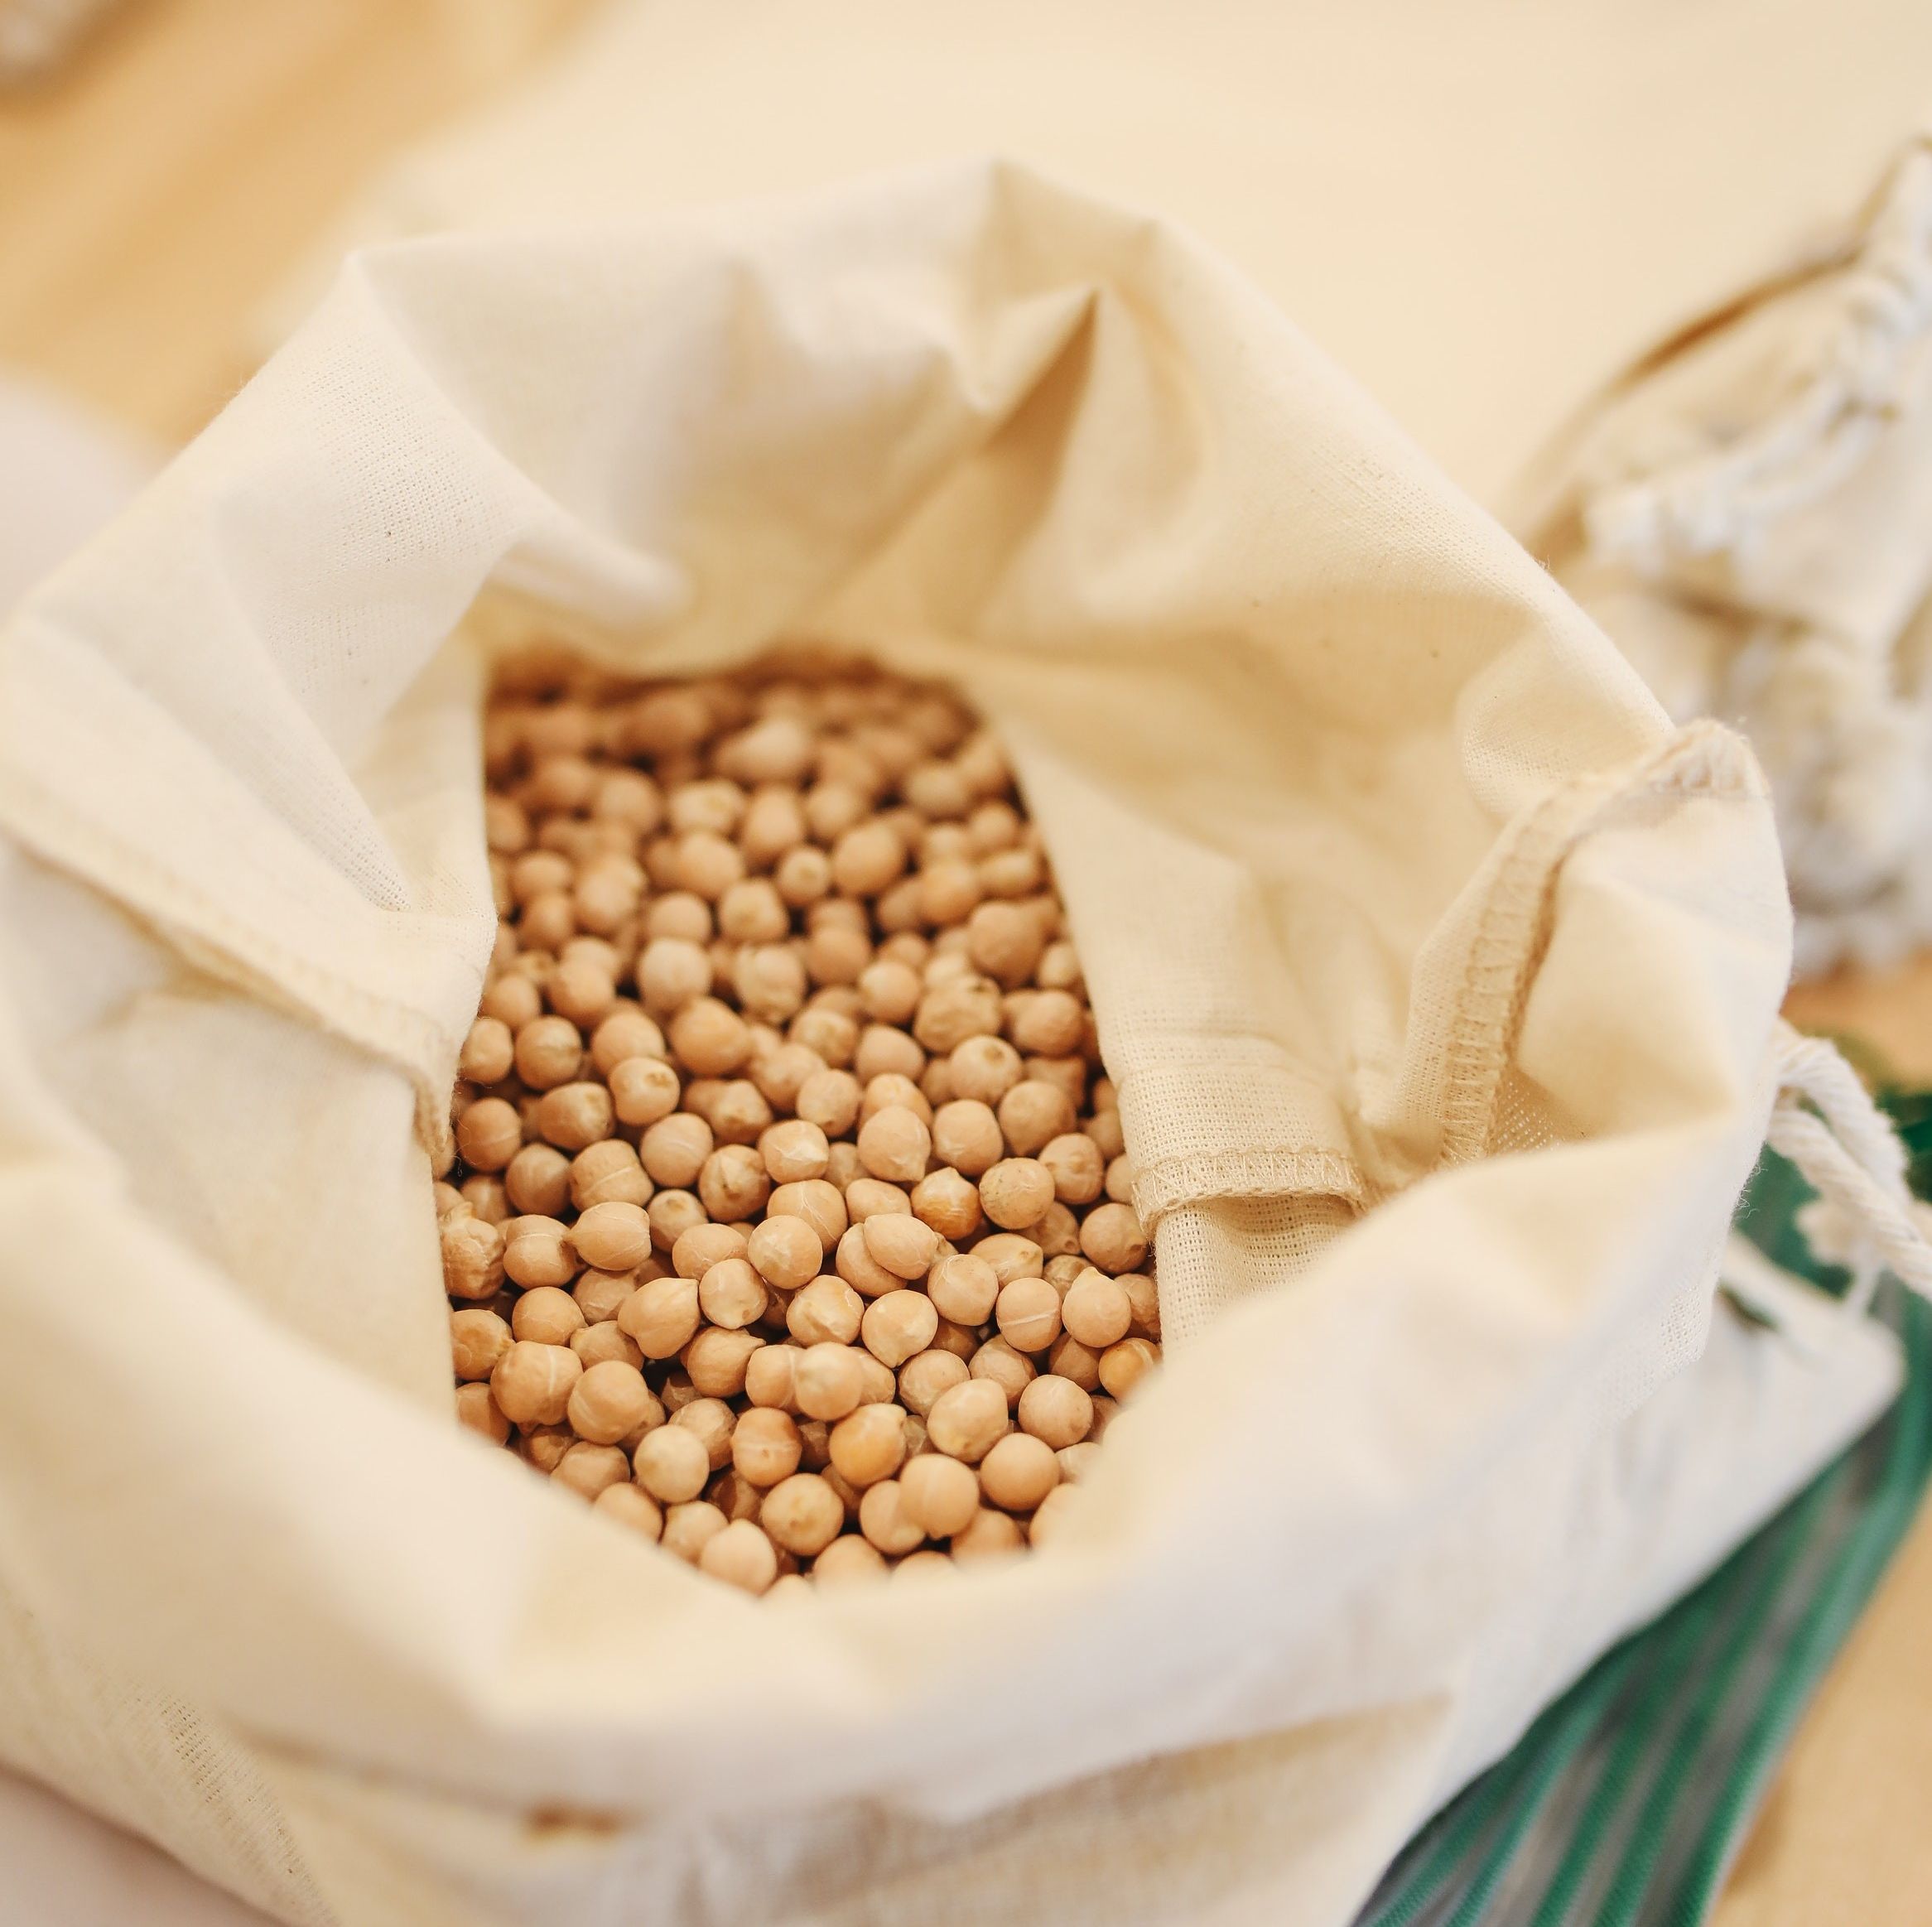 A cloth bag of chickpeas sits on a wooden surface.